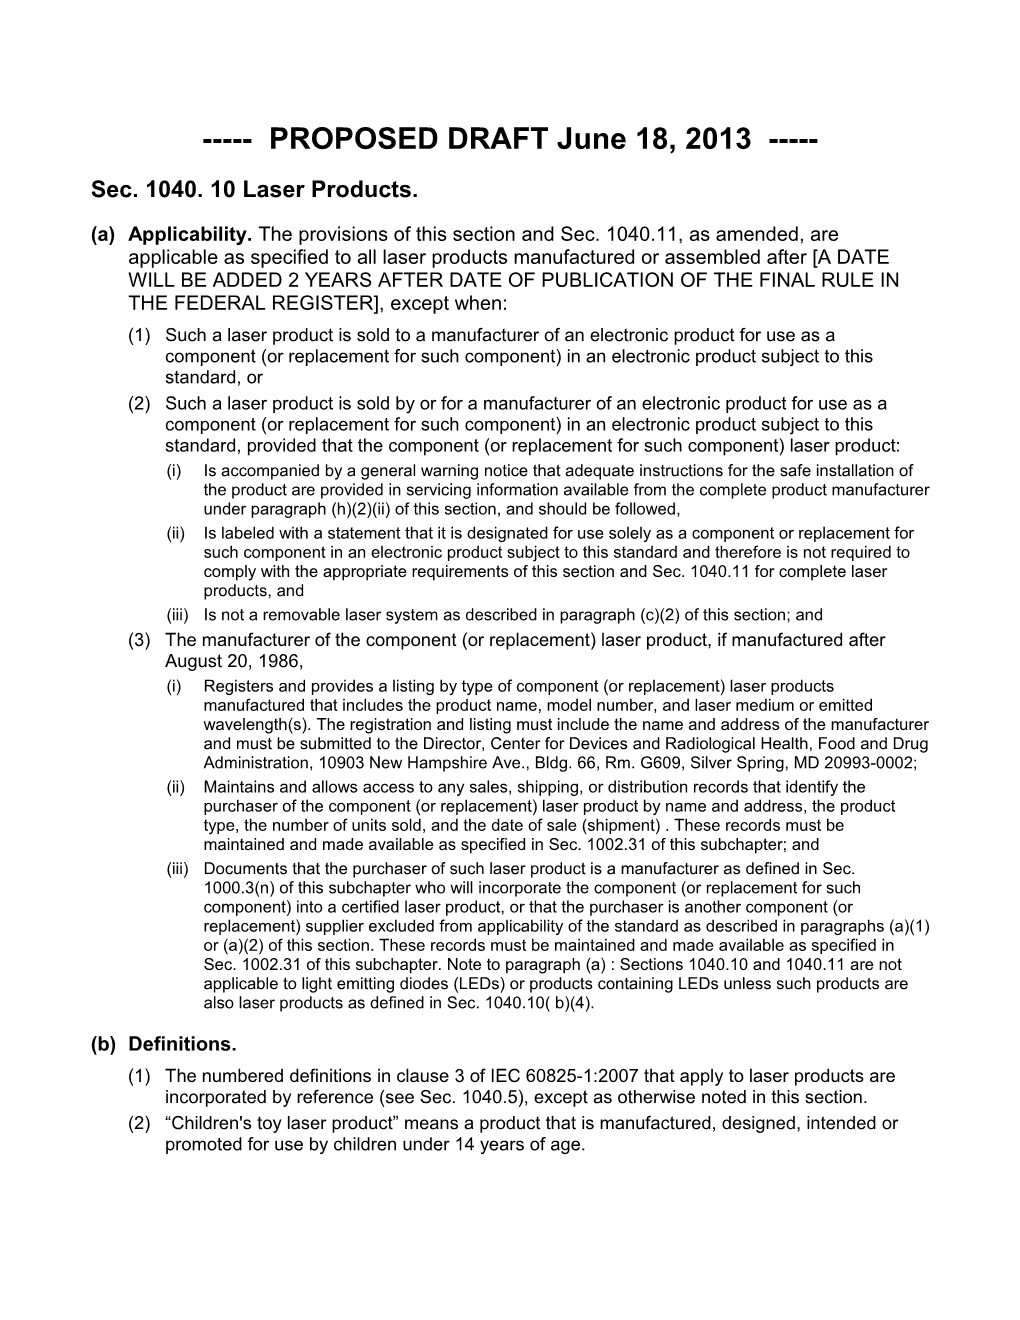 Sec. 1040. 10 Laser Products